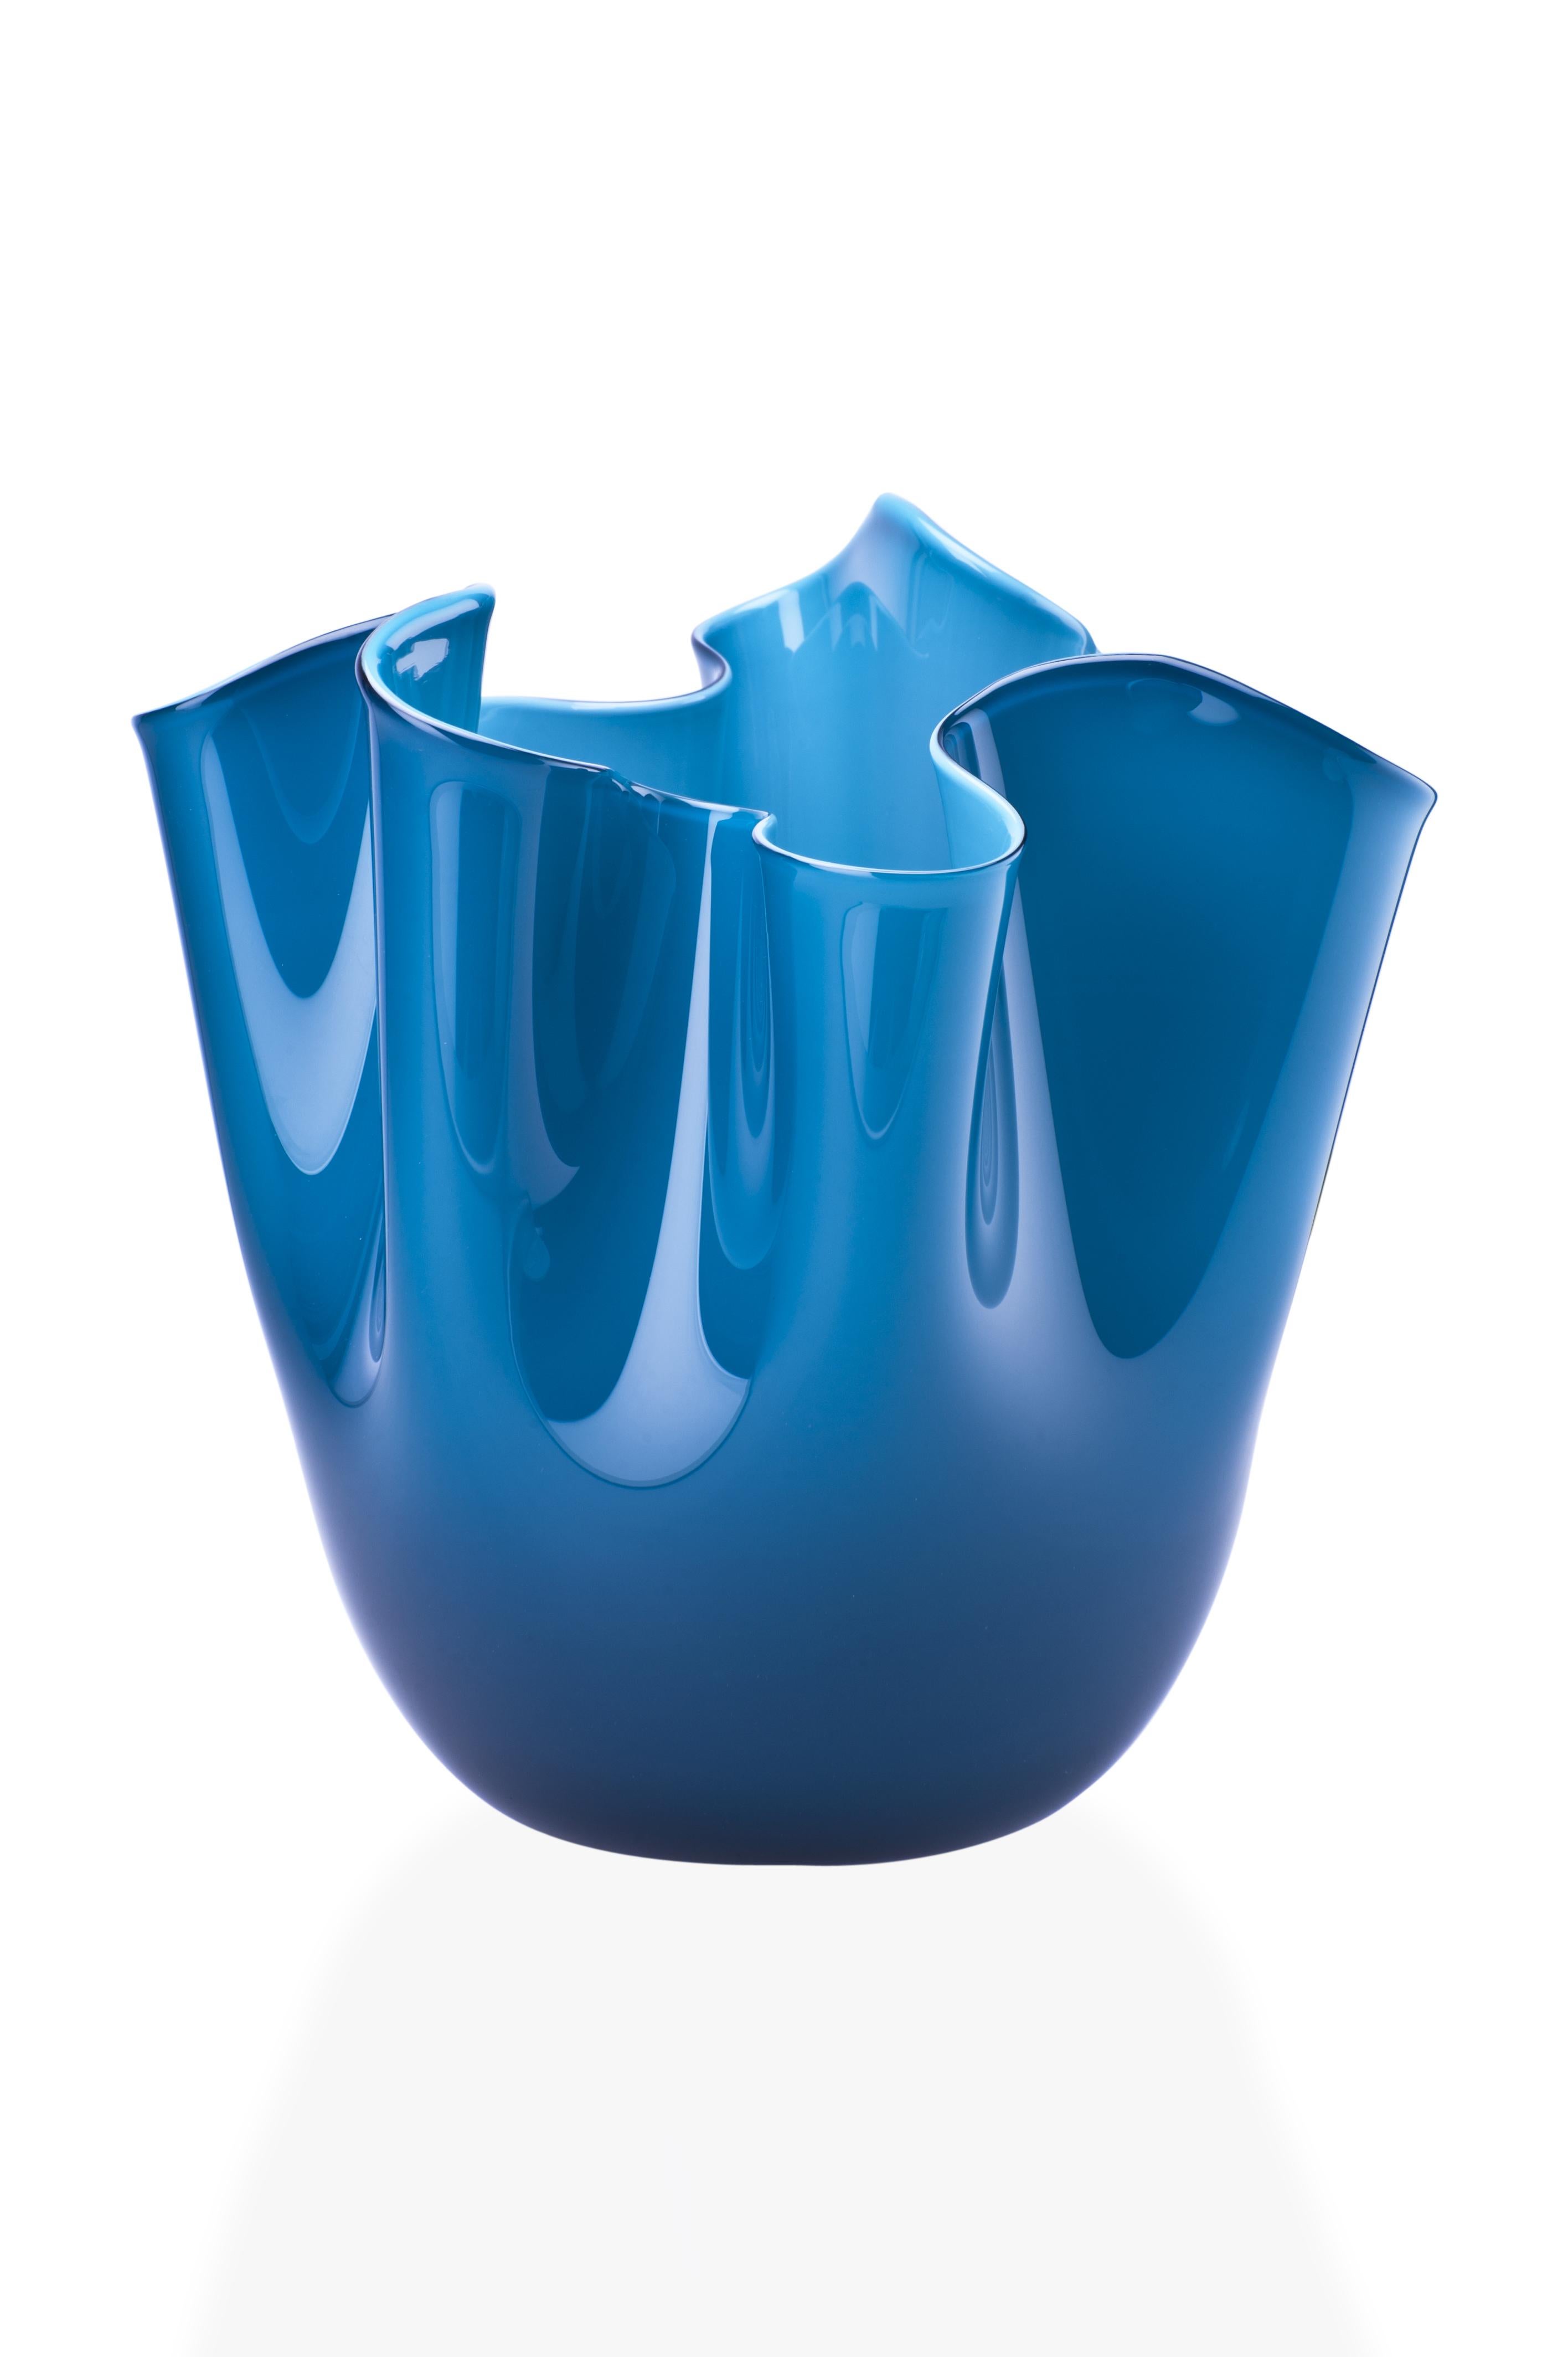 Venini glass vase with pinched rim in horizon and aquamarine designed by Fulvio Bianconi and Paolo Venini in 1948. Perfect for indoor home decor as container, vide-poche or statement piece for any room. Also available in other colors on